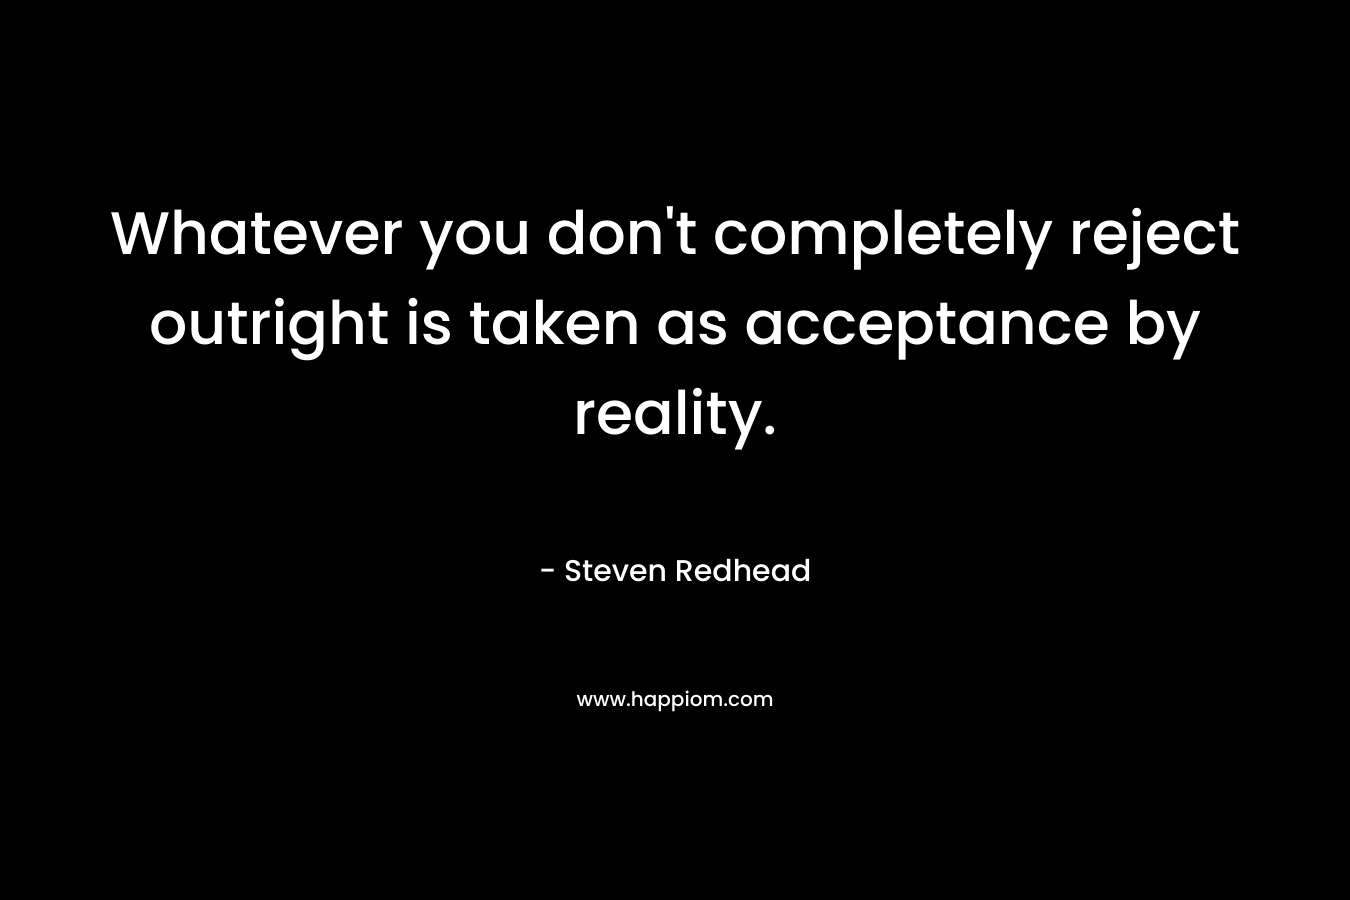 Whatever you don't completely reject outright is taken as acceptance by reality.